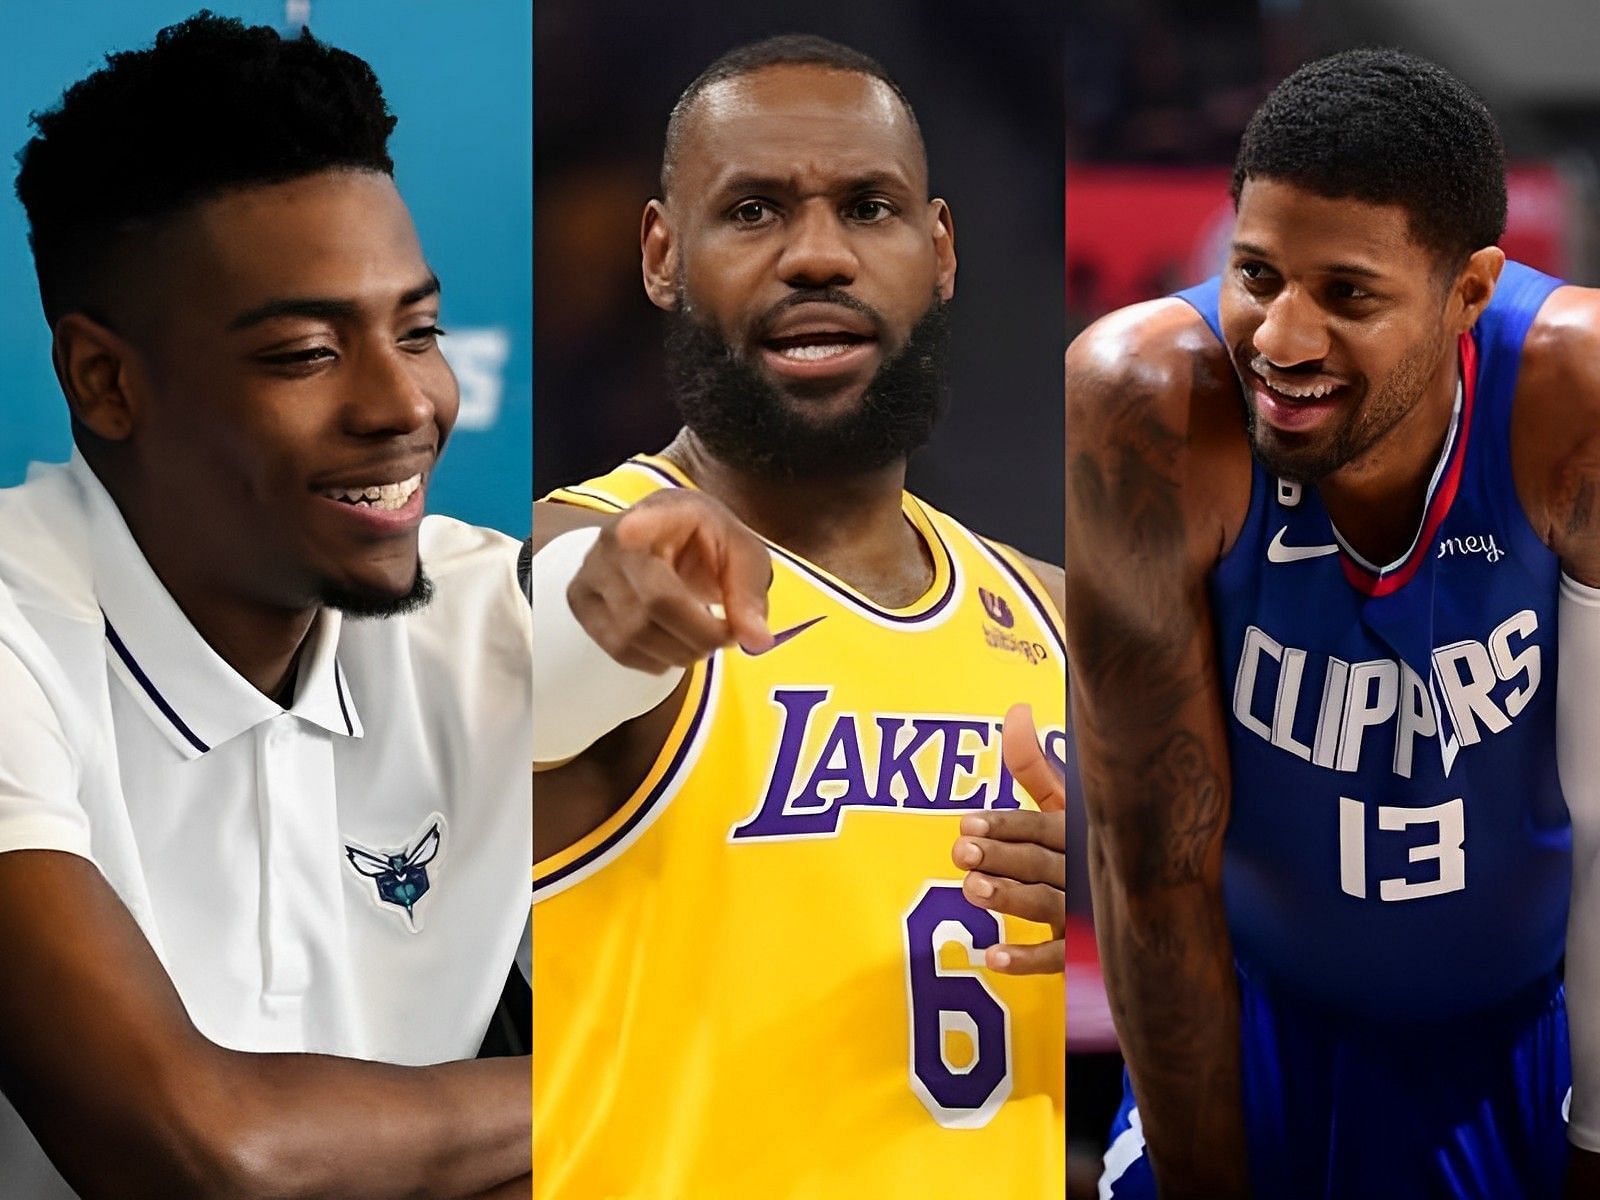 “Paul George is my GOAT” - Brandon Miller clarifies his 'GOAT' comments about LeBron James and PG